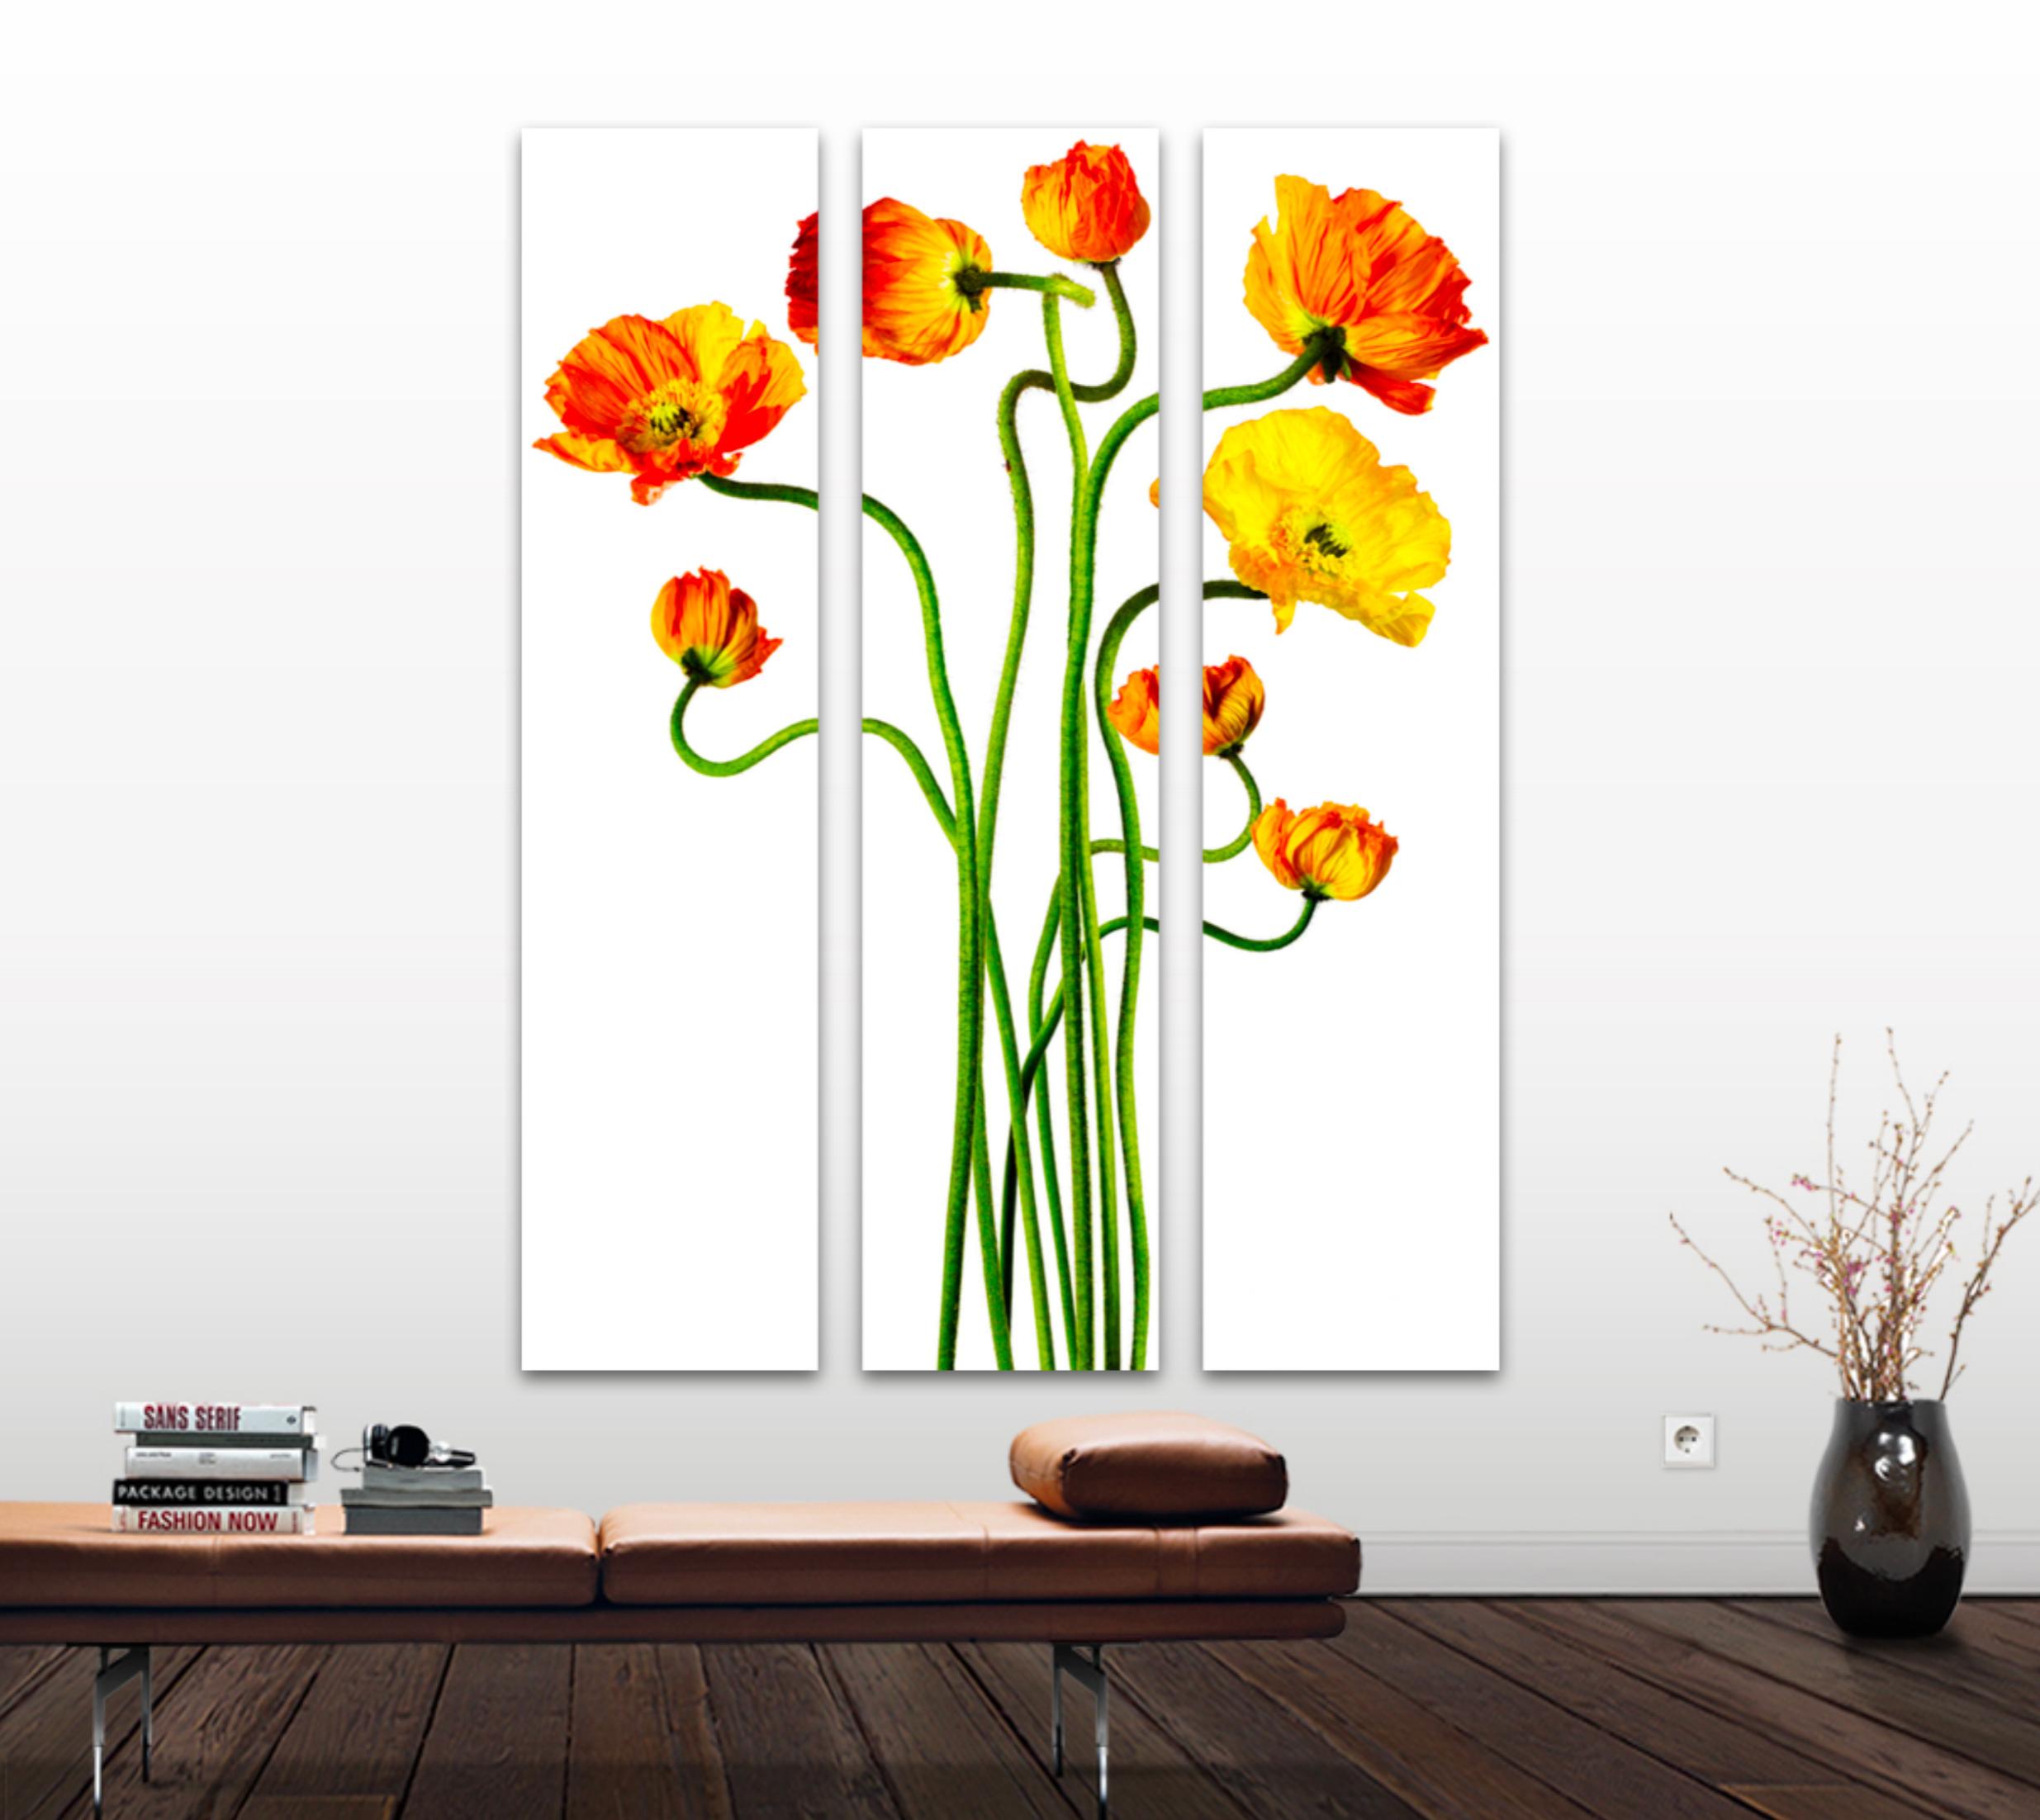 POPPING POPPIES TRIPTYCH - large scale 66 x 57 